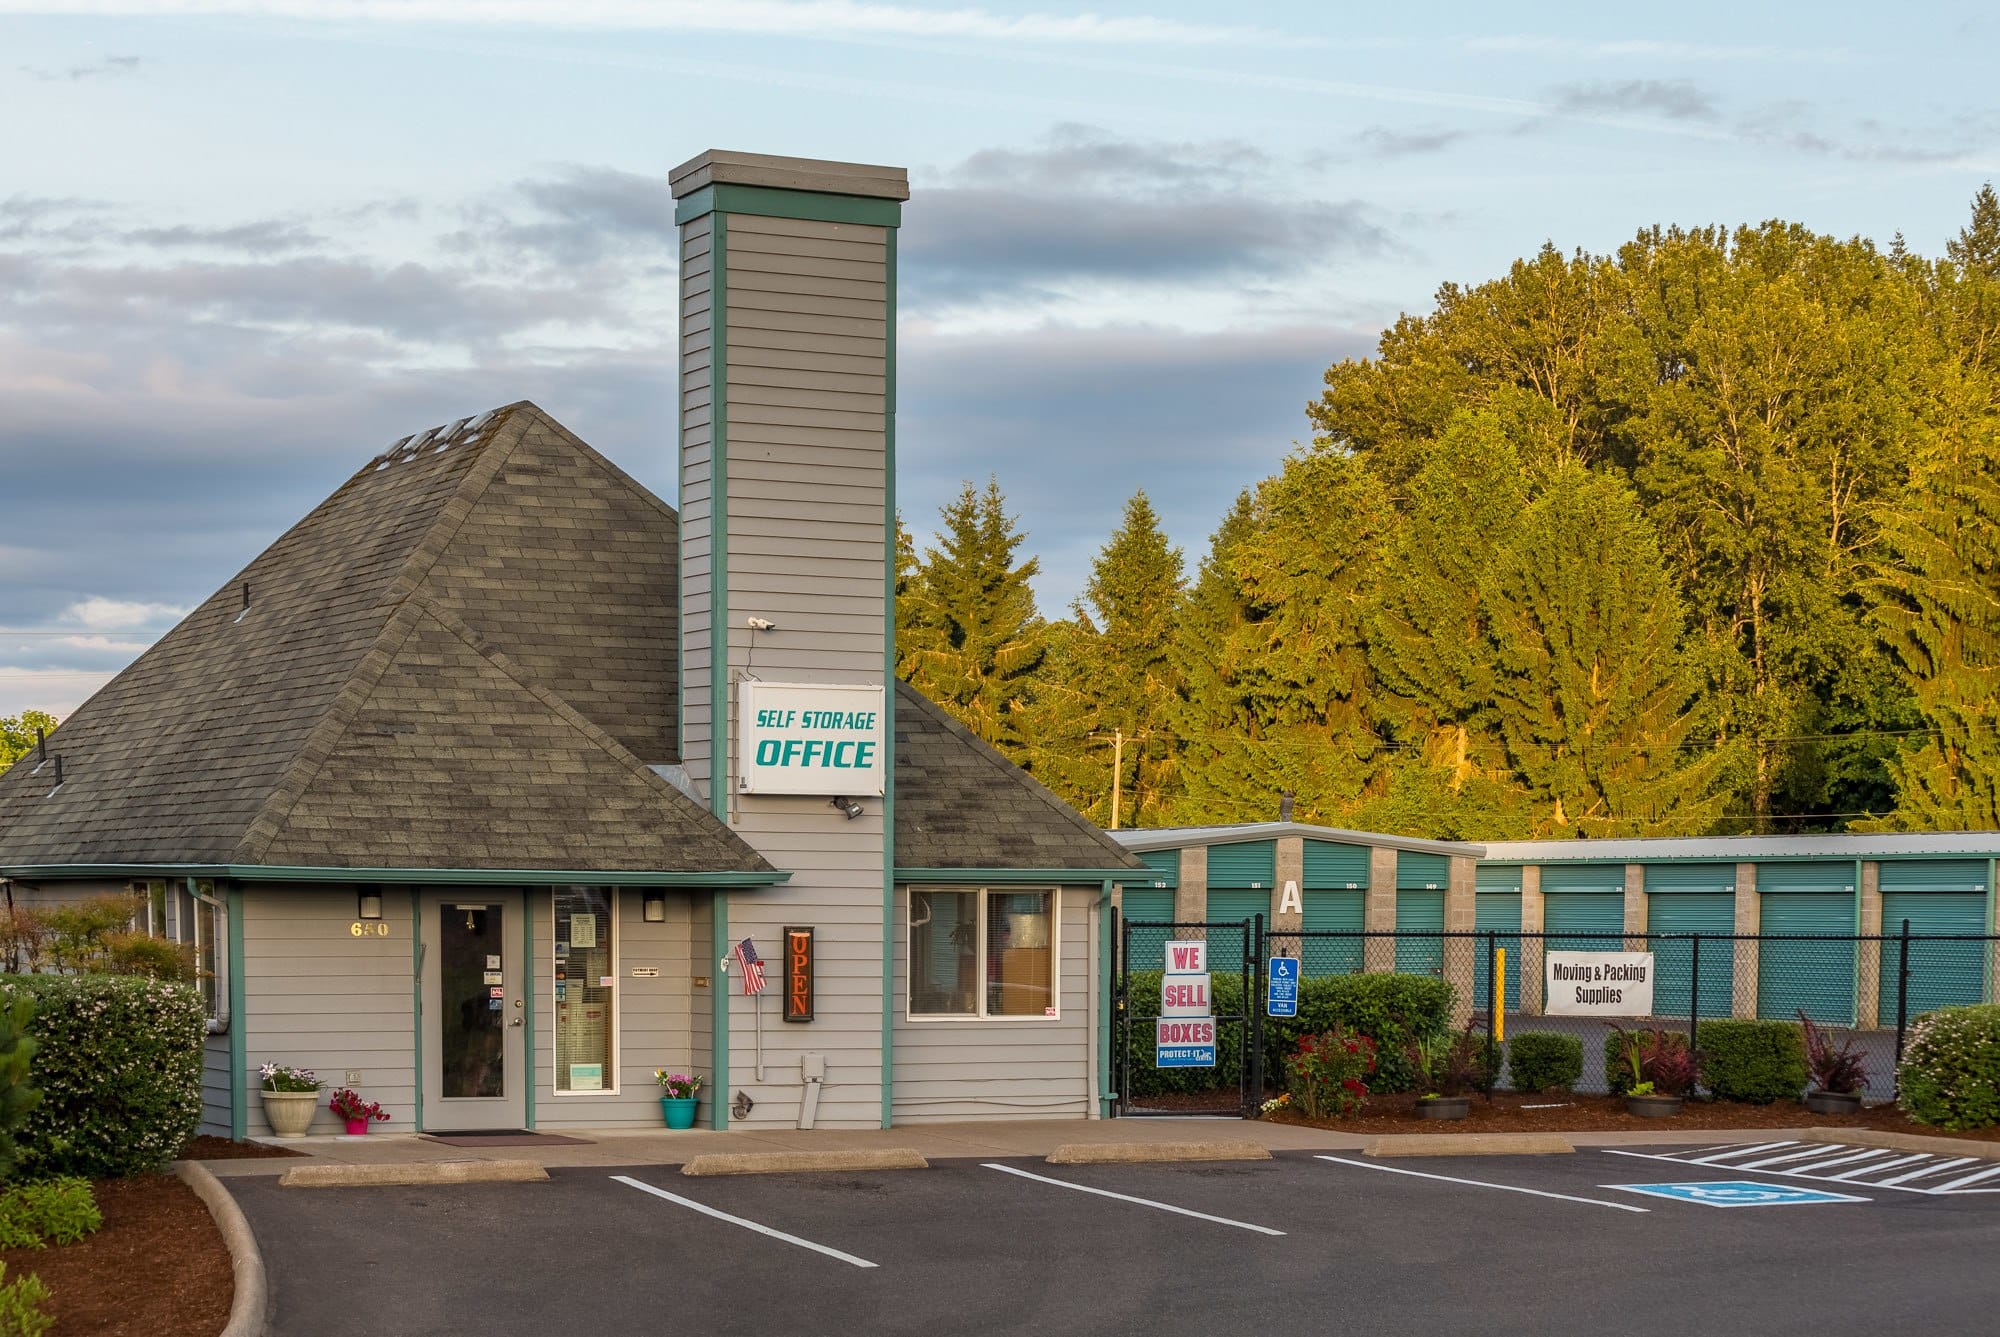 Self storage for all of your needs in Albany, OR